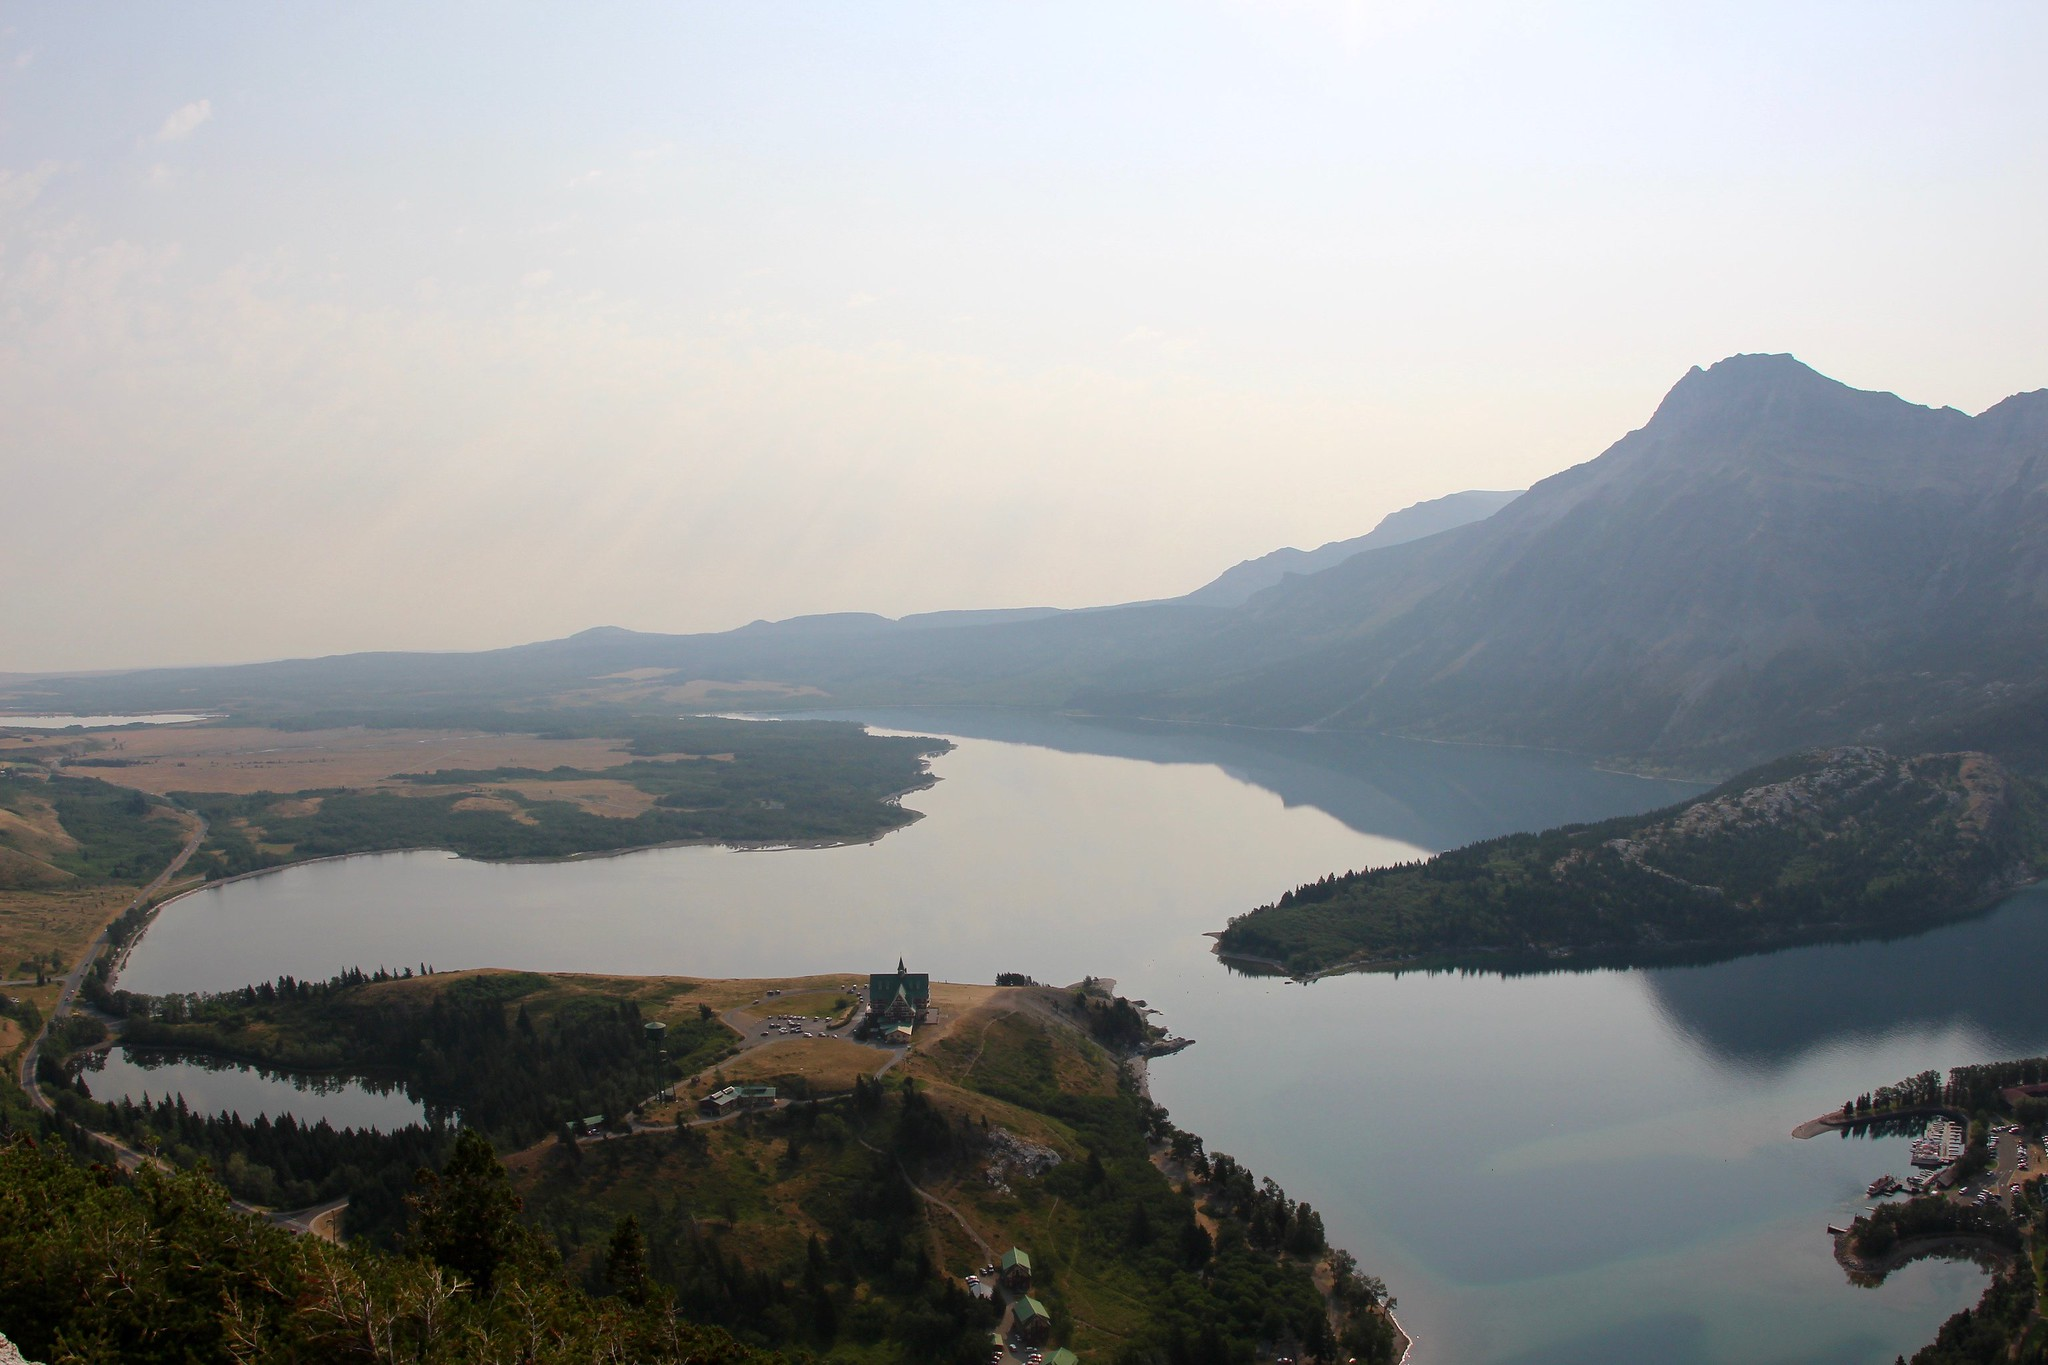 waterton lakes photo by David Fulmer on Flickr